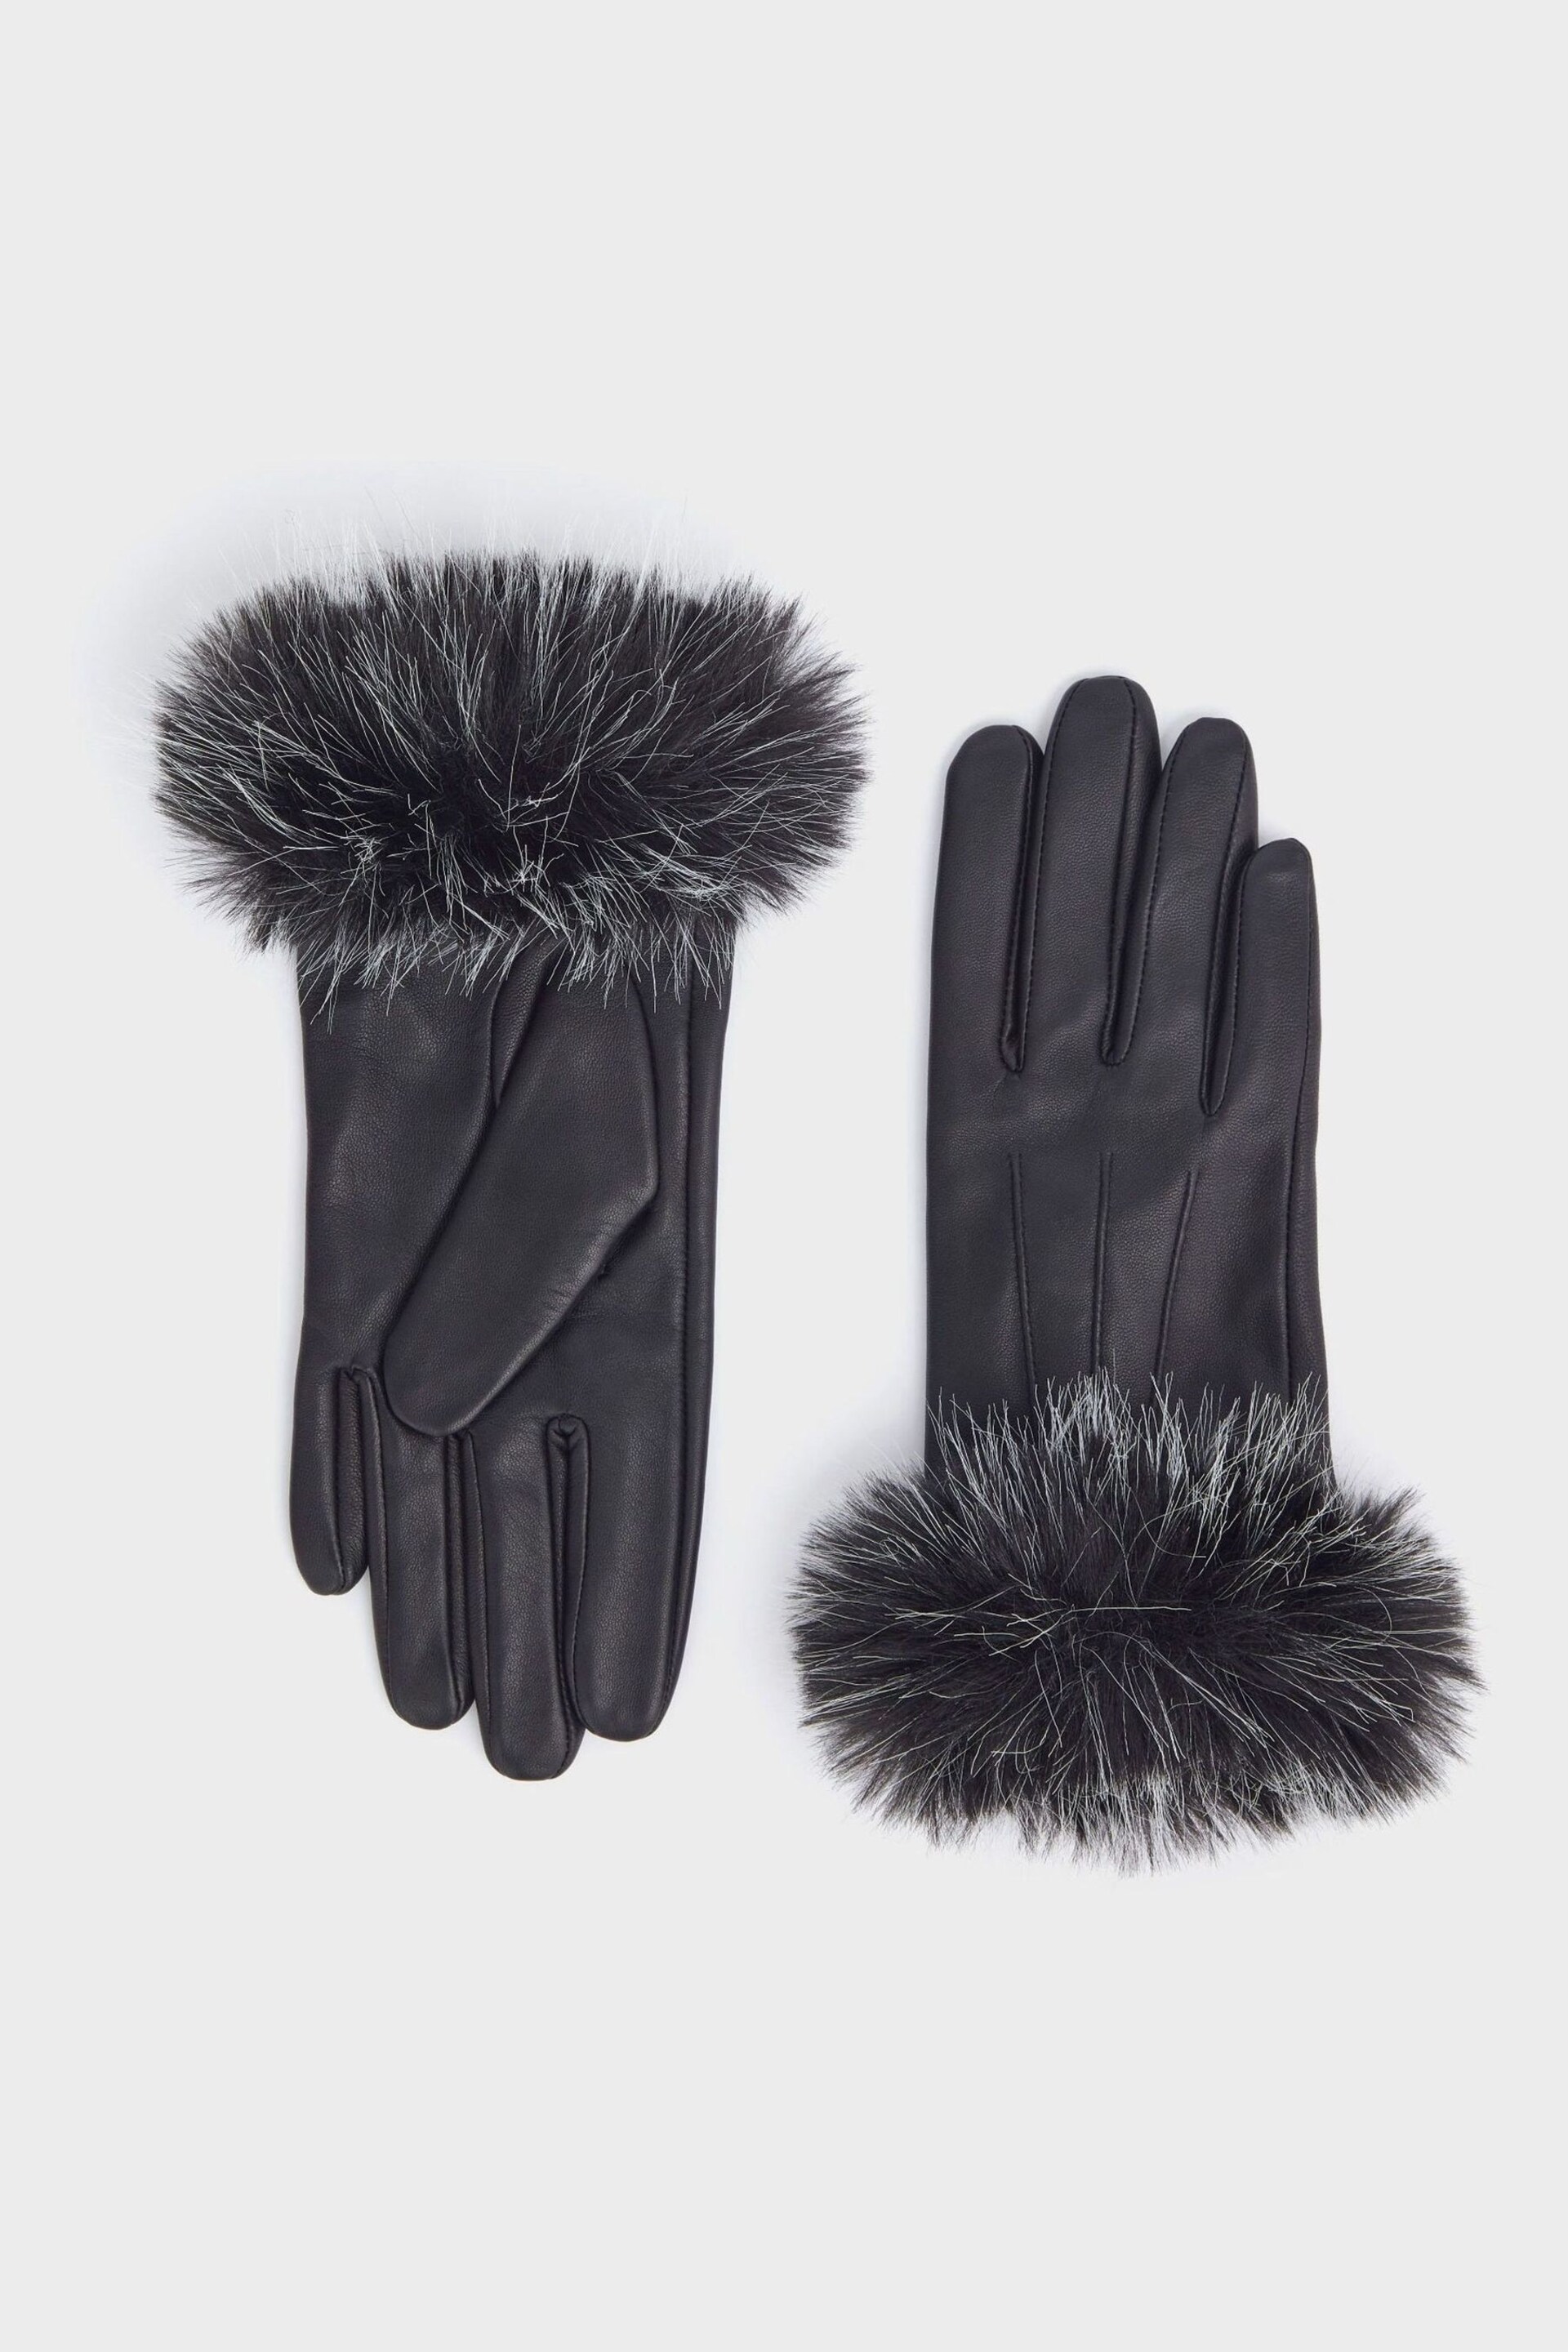 Osprey London The Penny Leather Gloves - Image 1 of 4